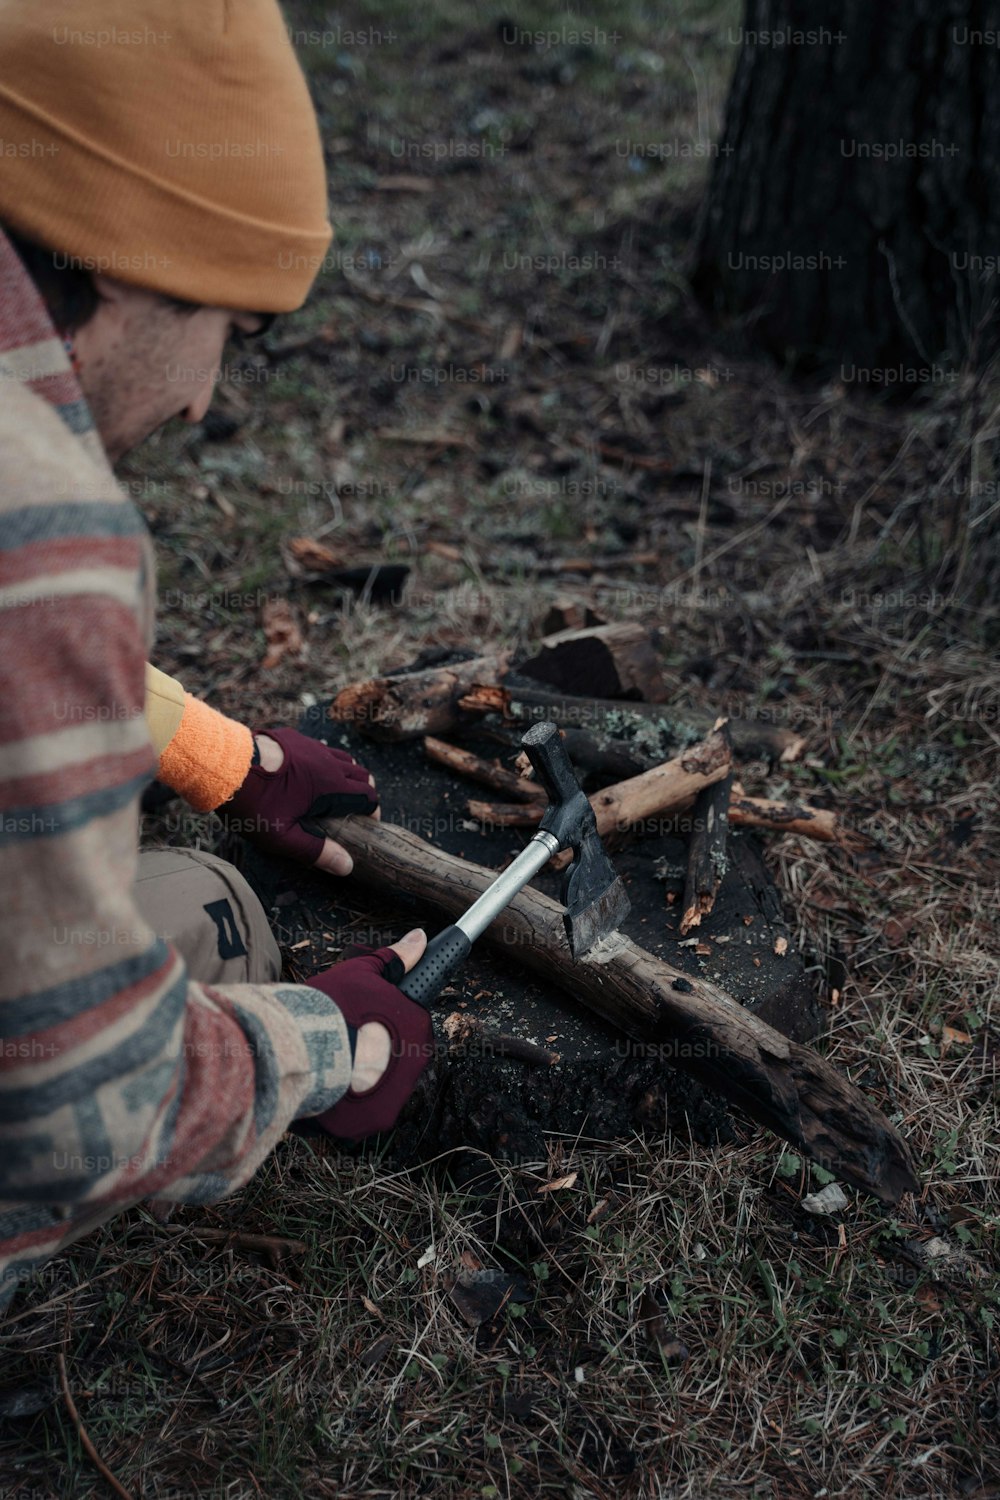 a man in a striped shirt chopping wood with a knife